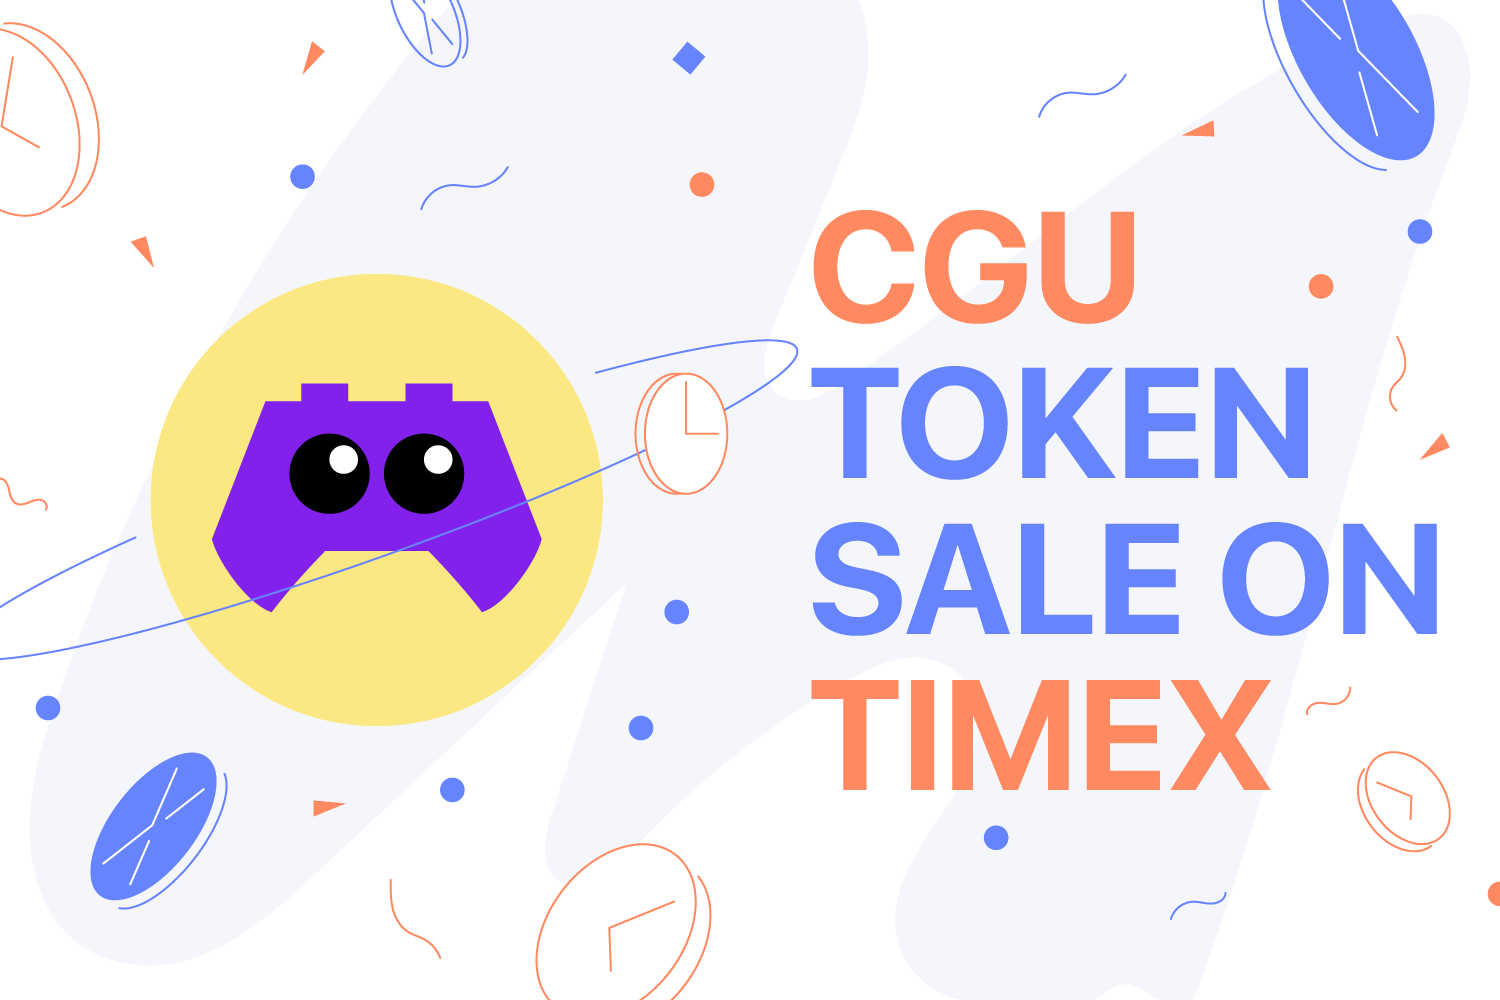 Announcing the CGU token sale on TimeX!